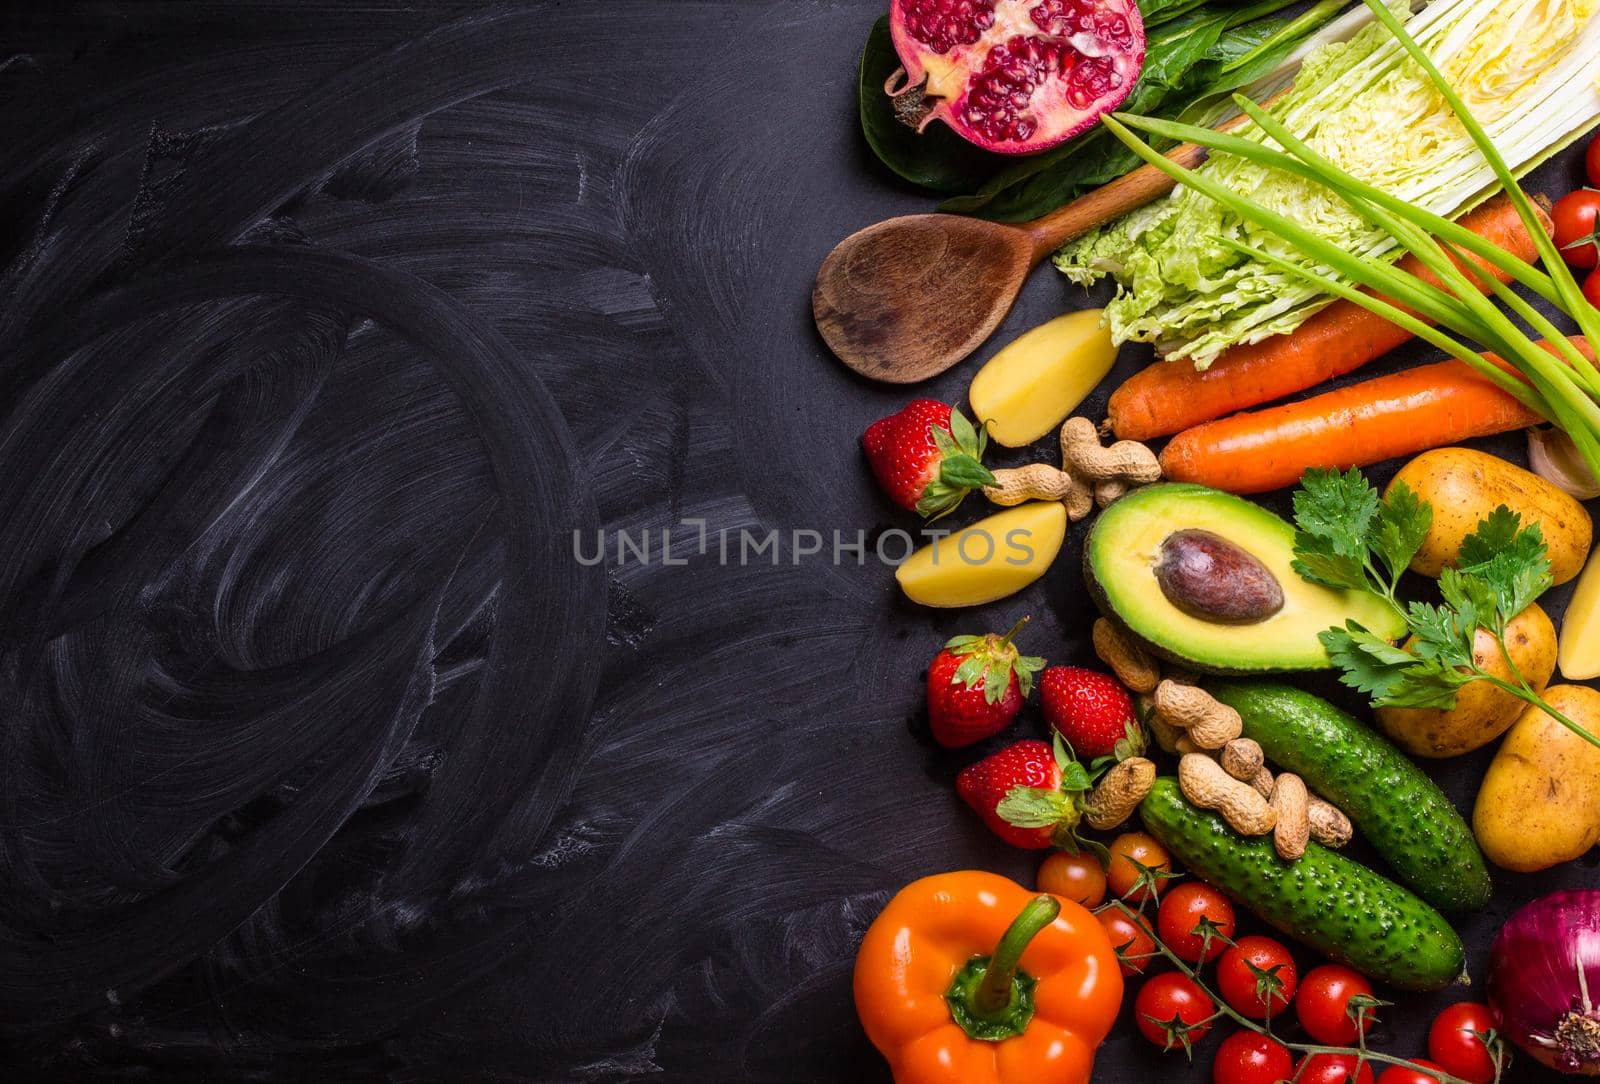 Vegetables, fruits, herbs, raw ingredients for cooking and spoon on rustic black chalk board background. Healthy, clean eating concept. Vegan or gluten free diet. Space for text. Top view. Food frame